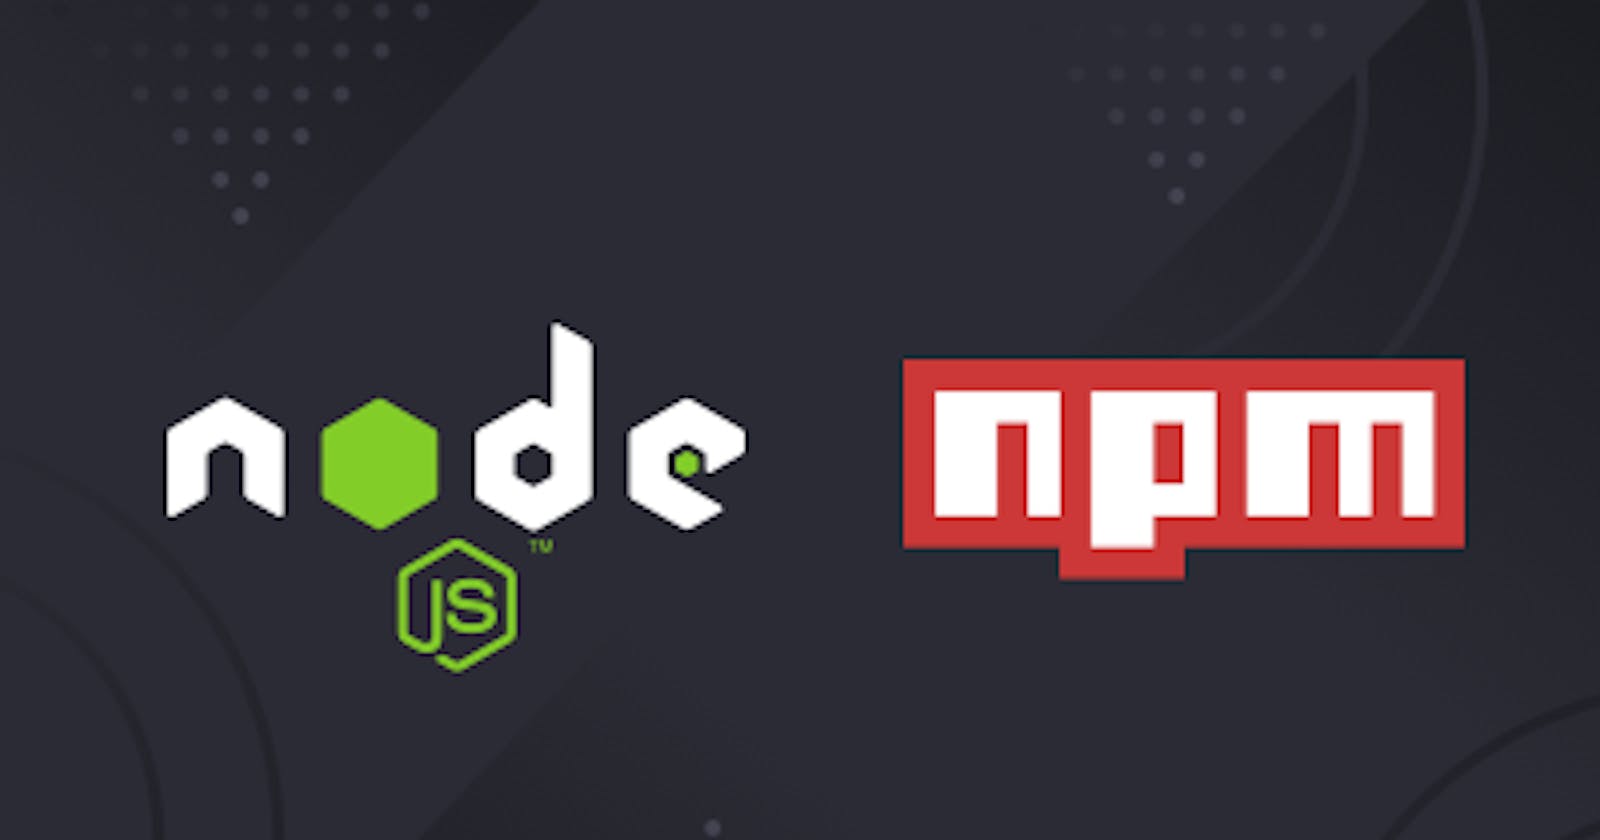 An introduction to Node.js and NPM